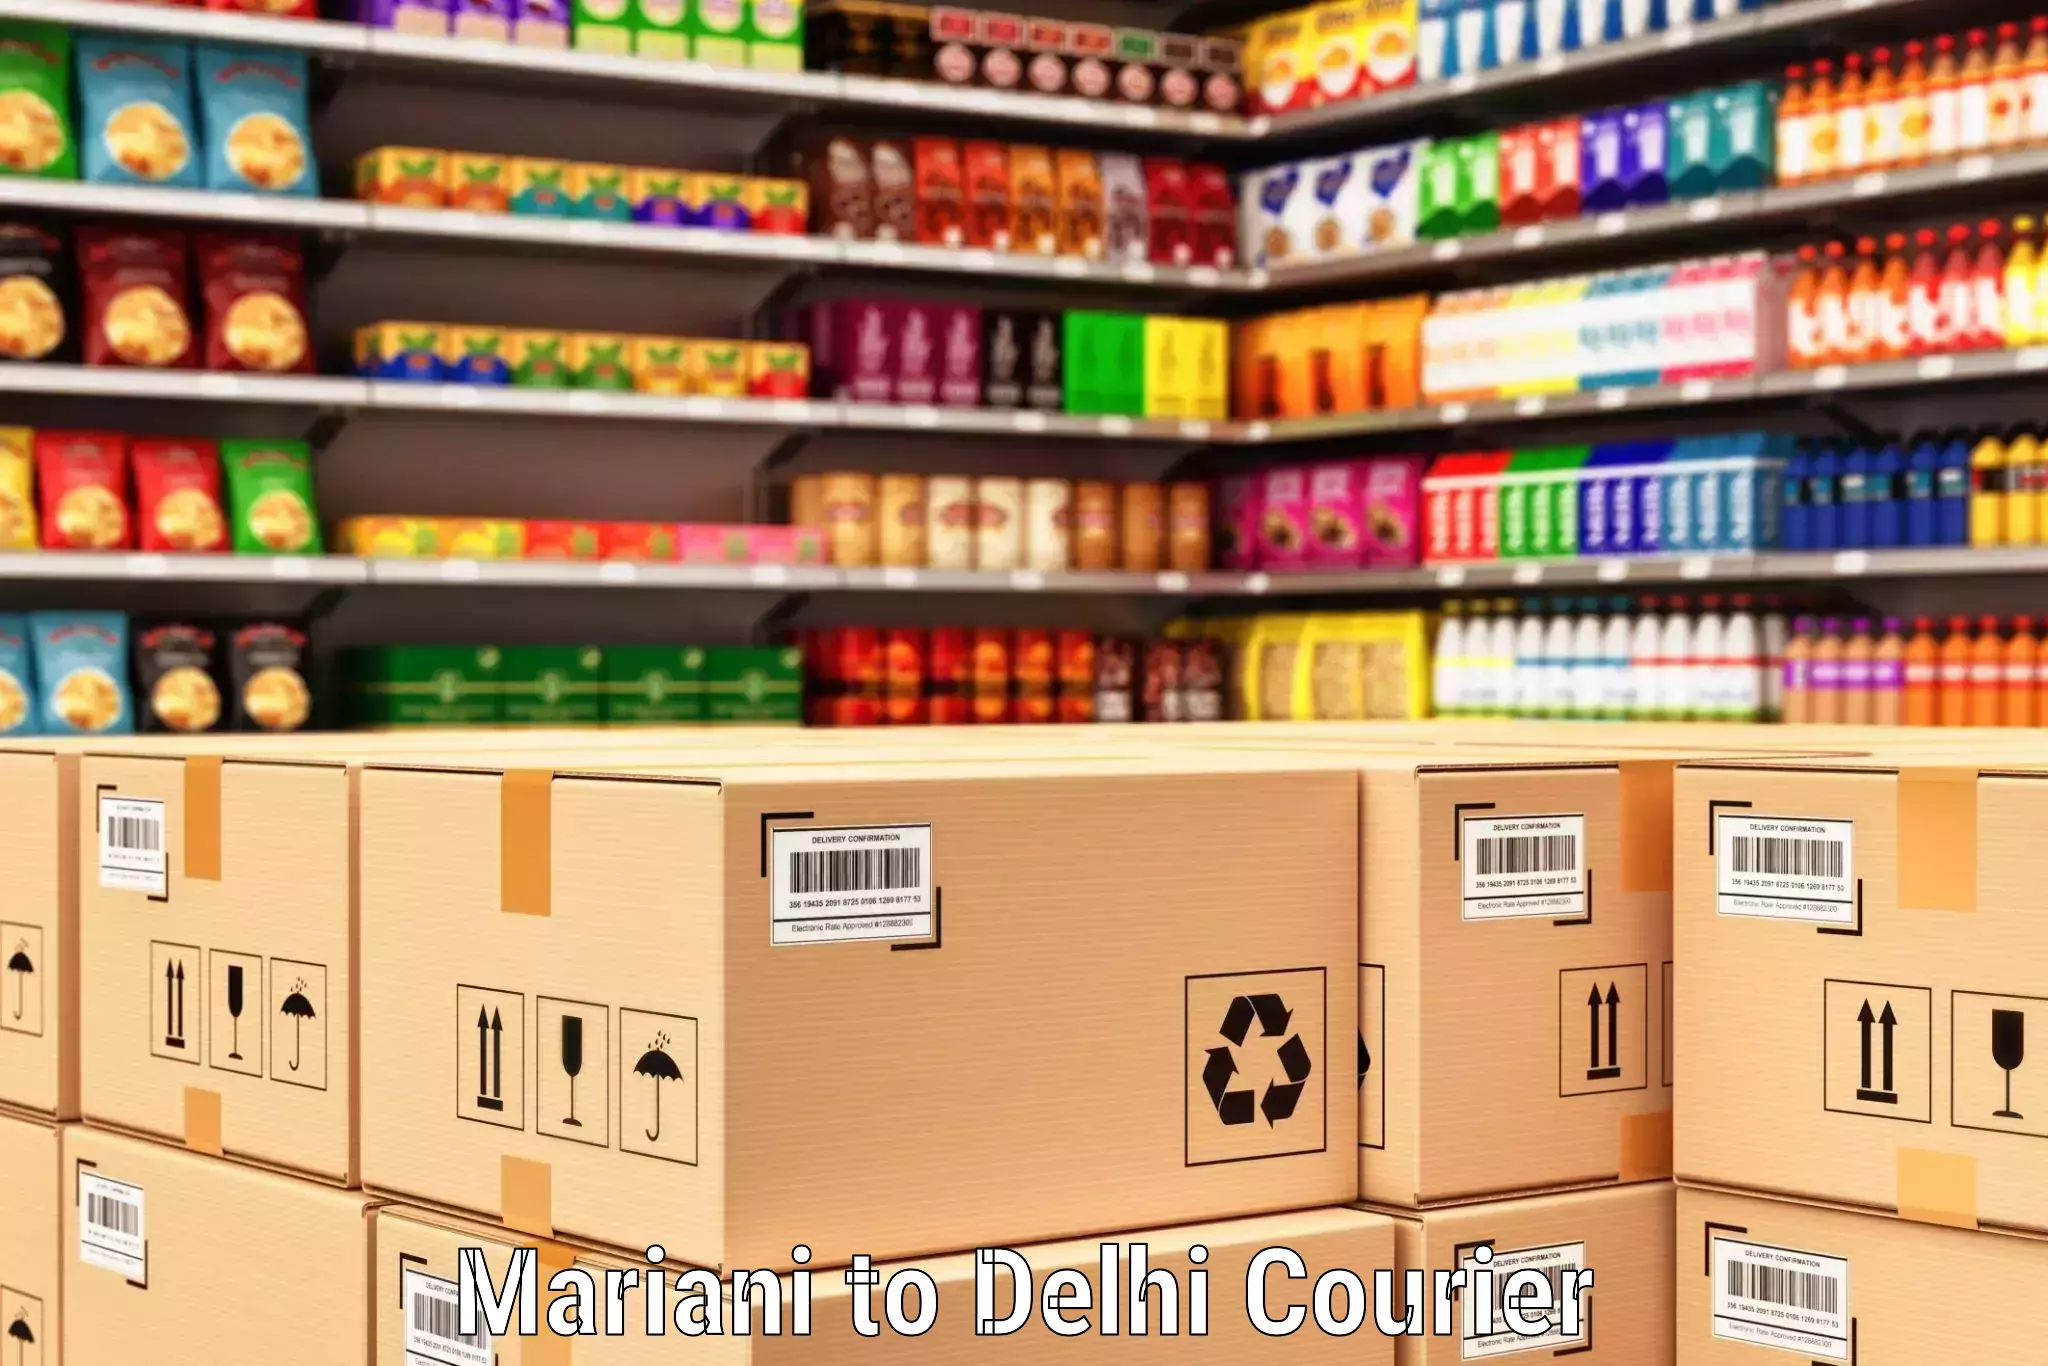 Fast-track shipping solutions in Mariani to Delhi